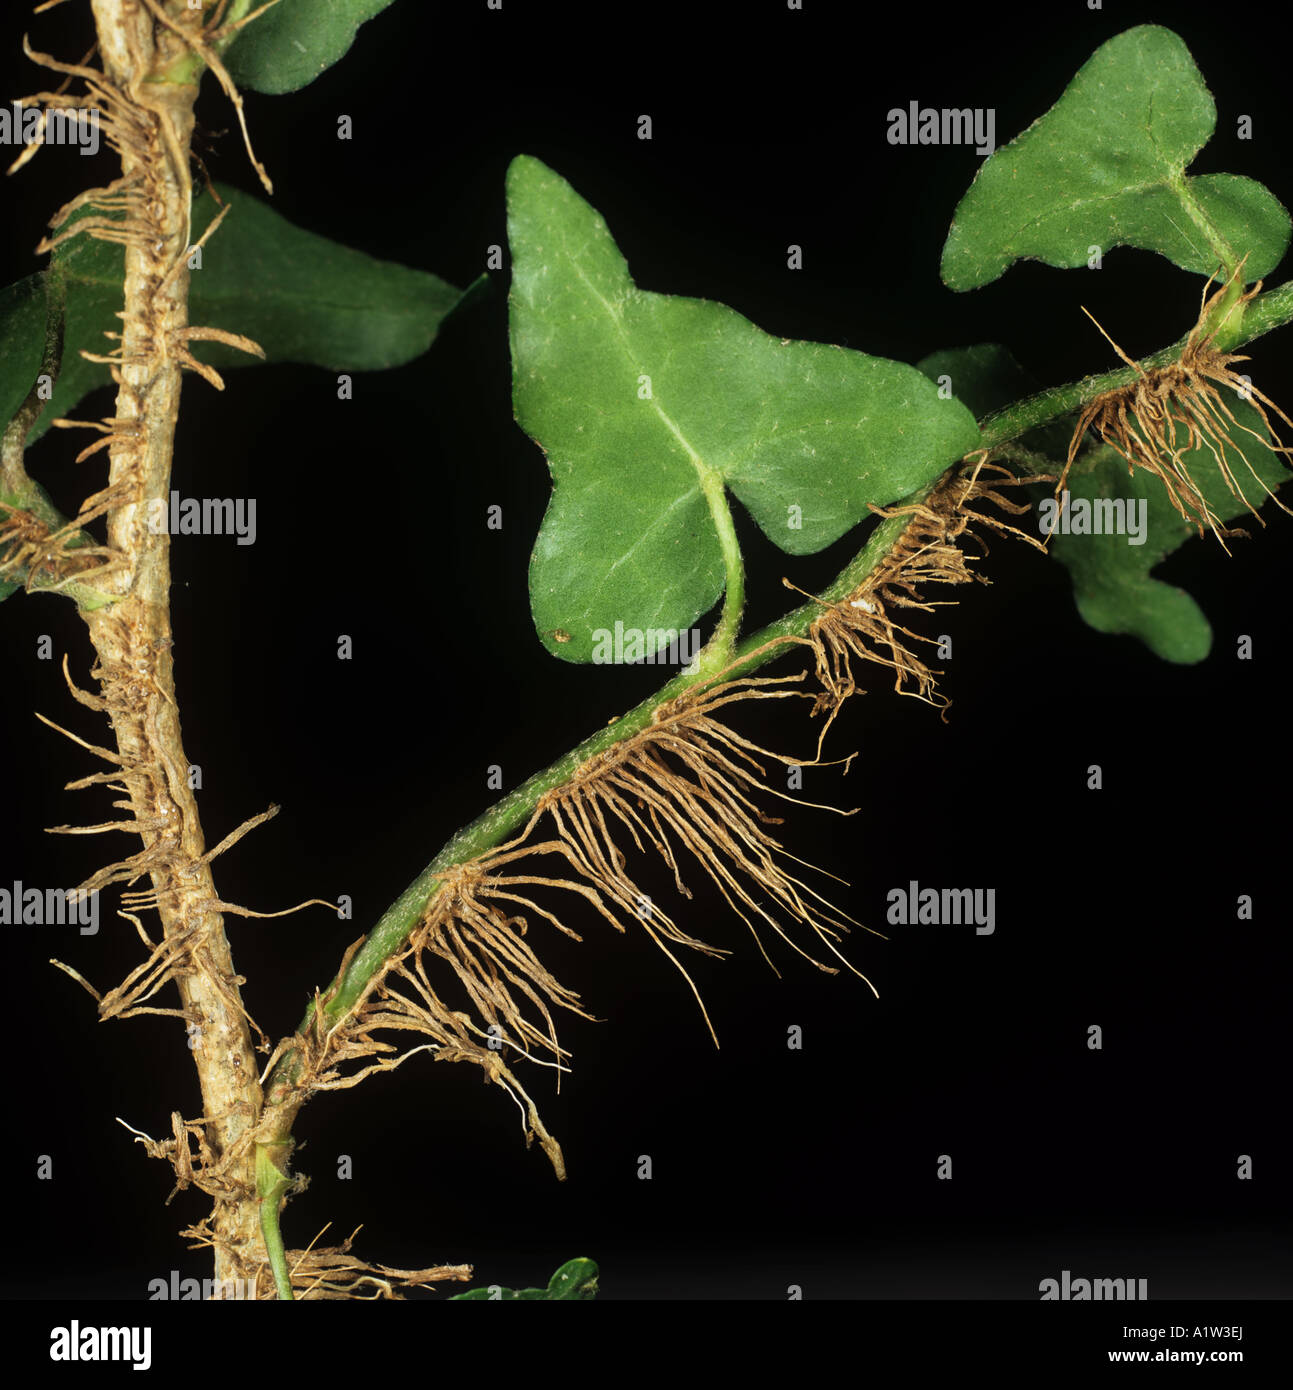 Ivy Hedera helix adventitious roots used to clinging onto vertical surfaces Stock Photo